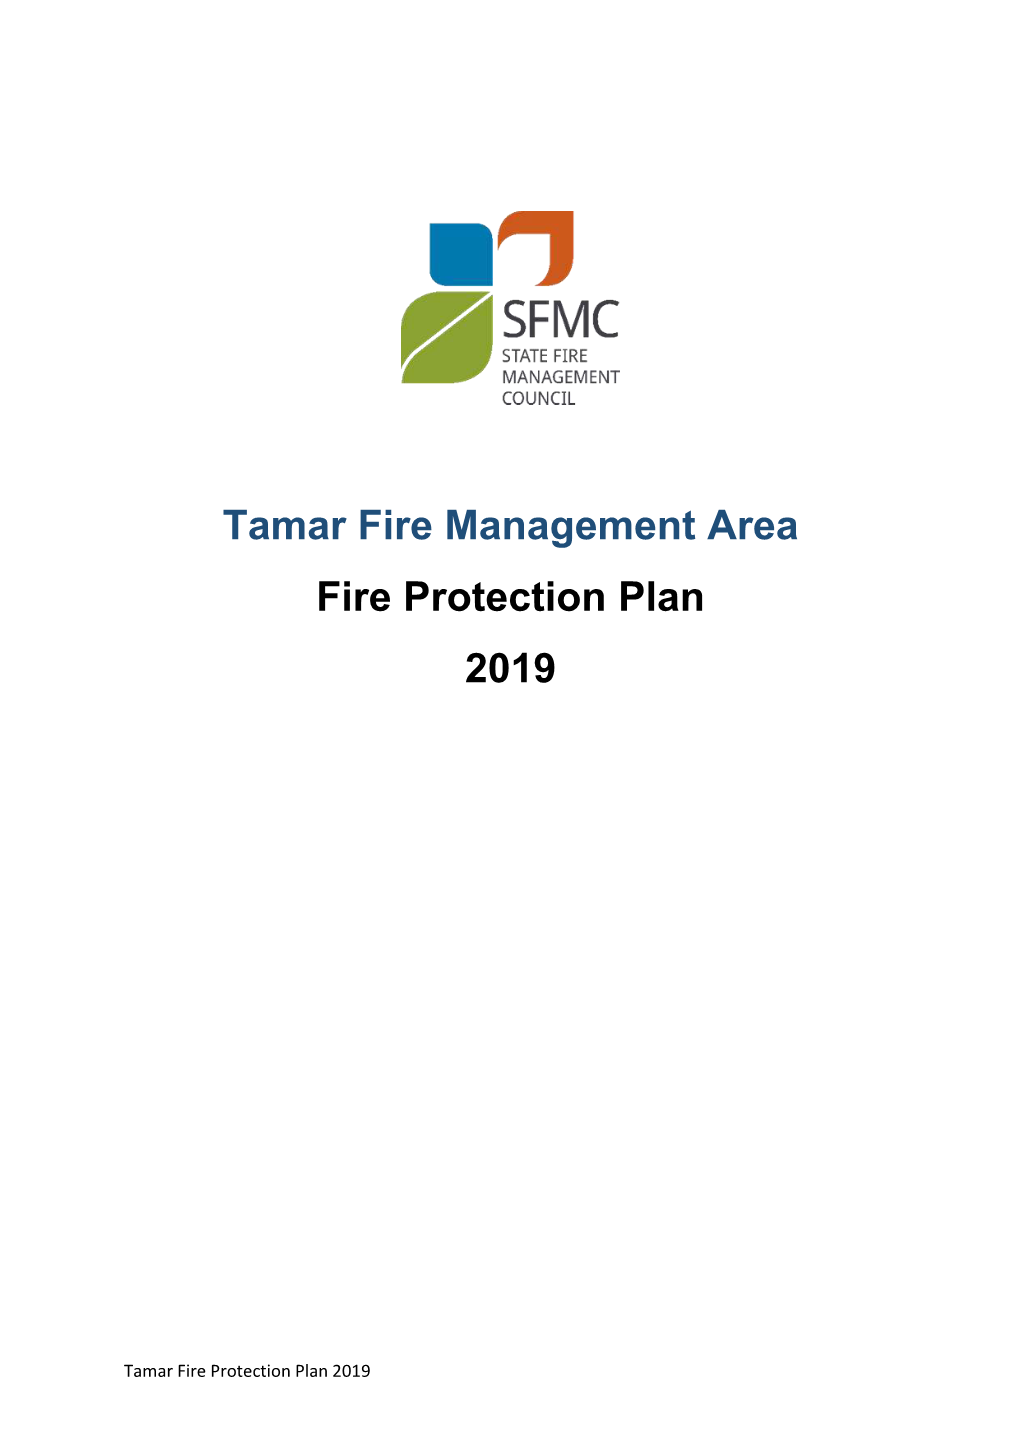 Tamar Fire Management Area Fire Protection Plan 2019